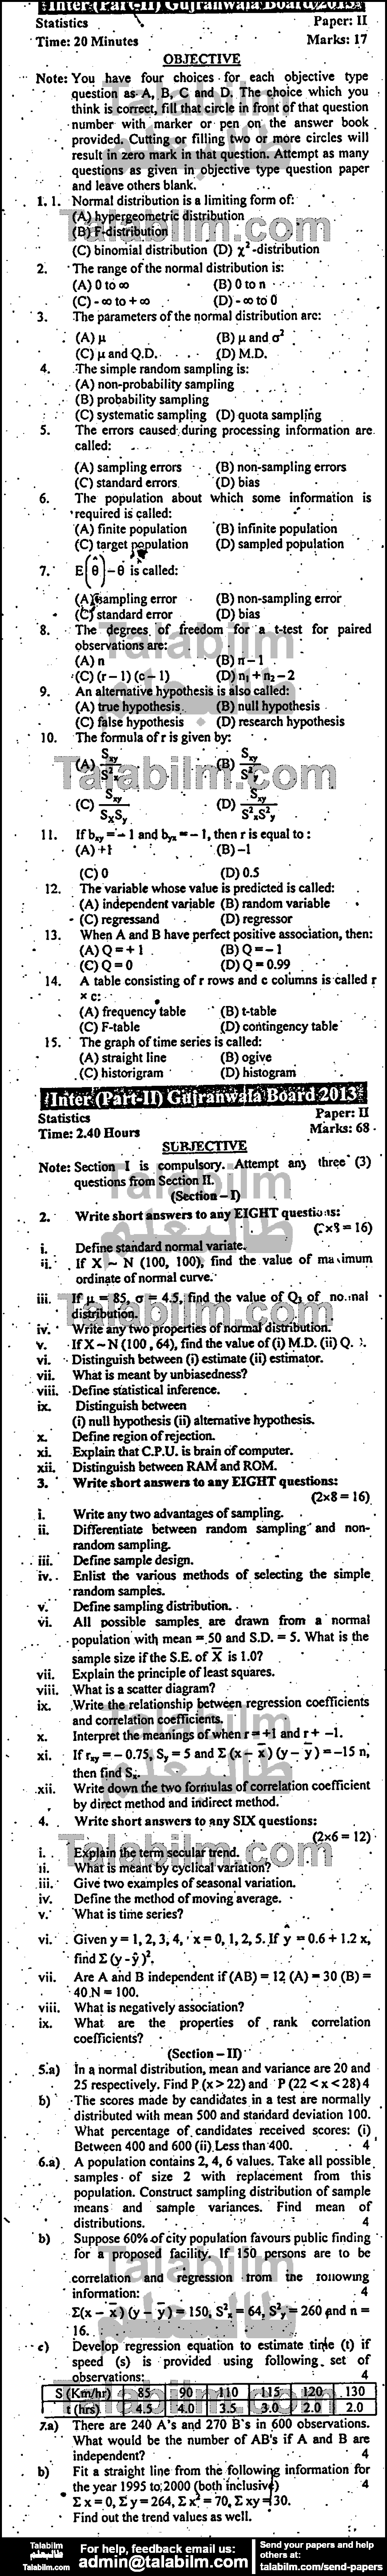 Statistics 0 past paper for Group-I 2013